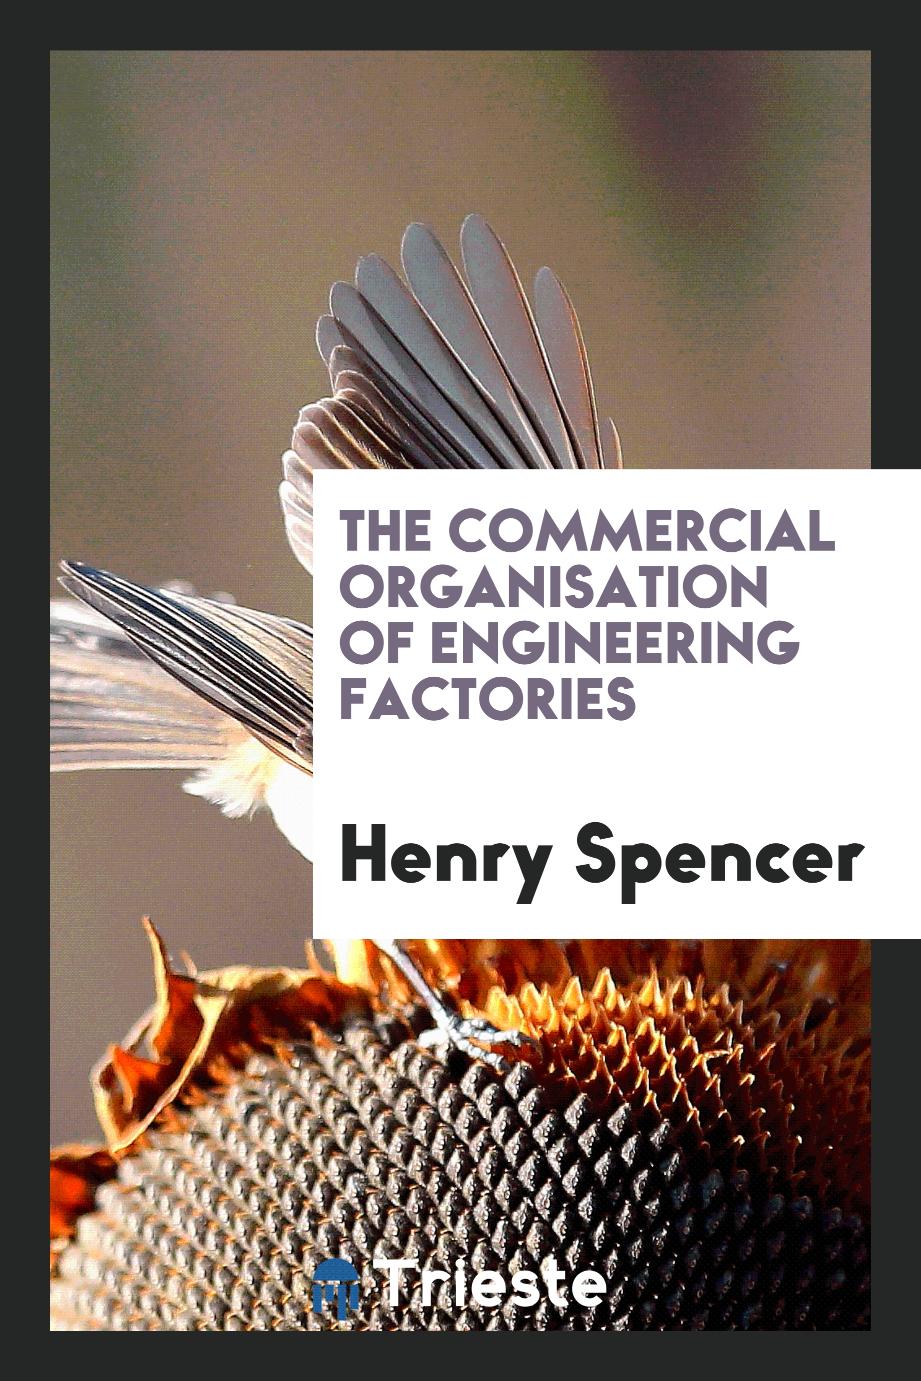 The commercial organisation of engineering factories